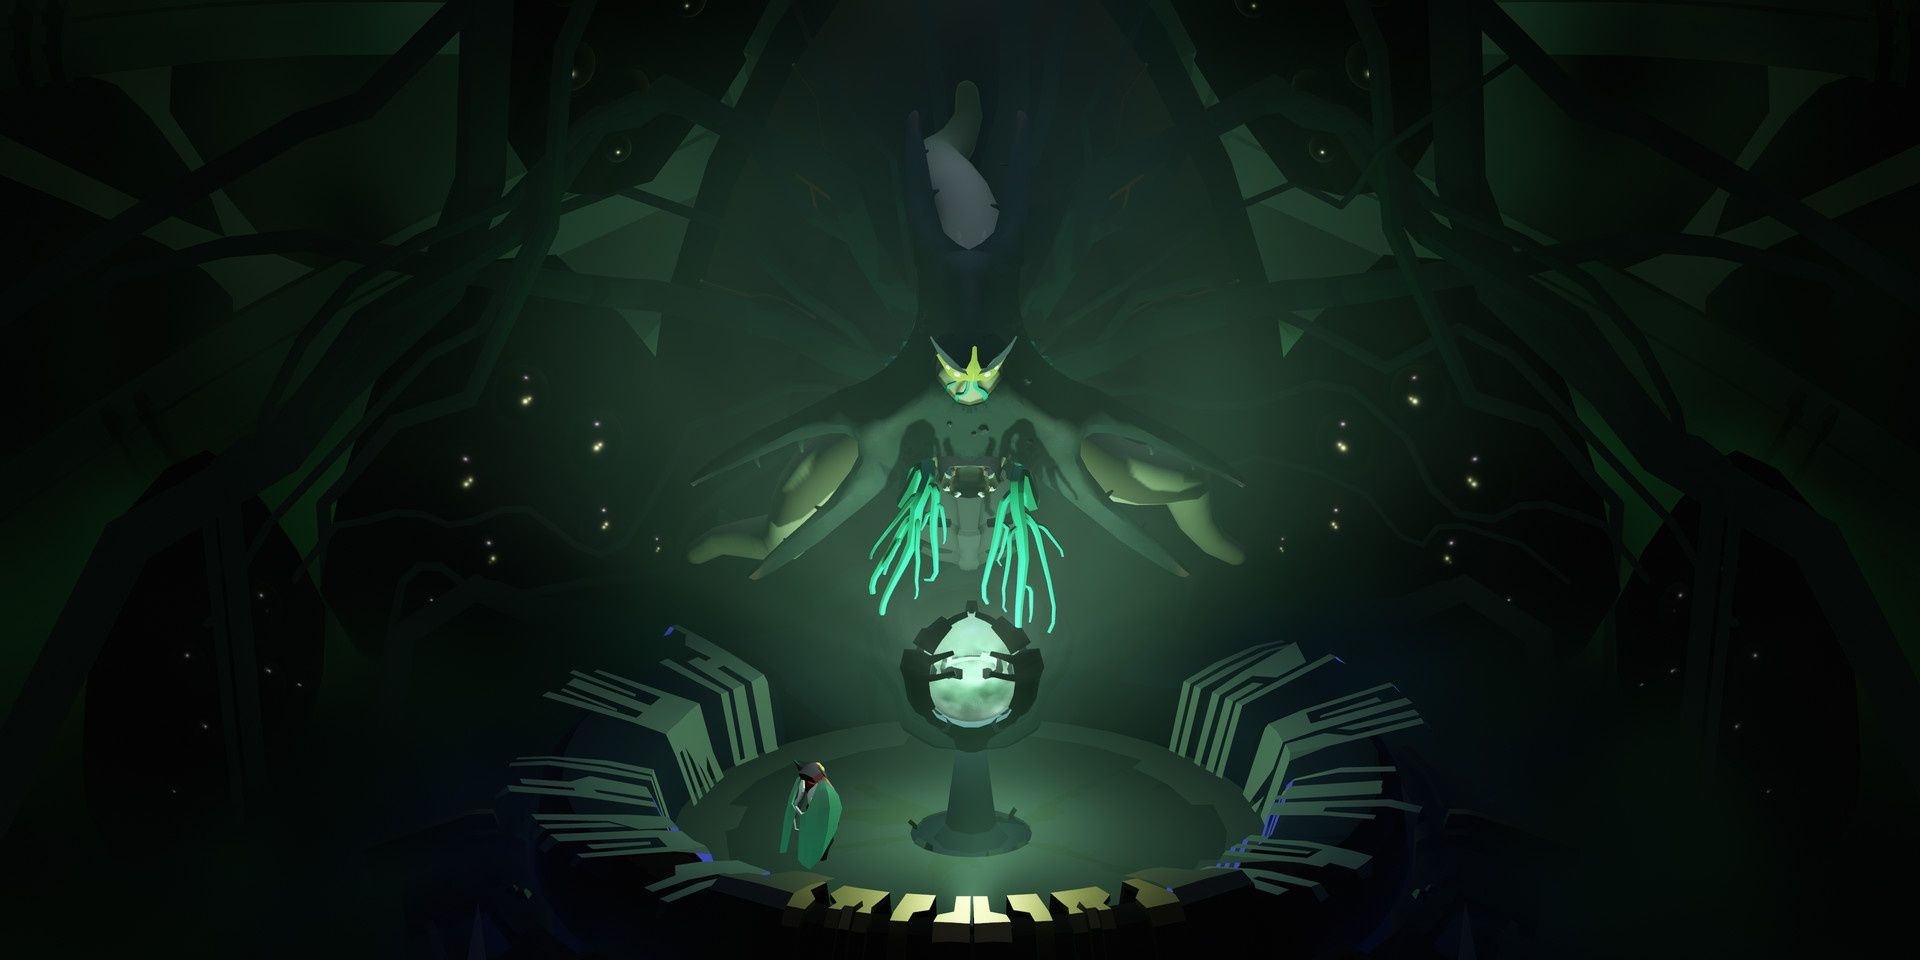 A small bug with wings stands next to a green orb that is glowing, revealing a much larger bug in Cocoon